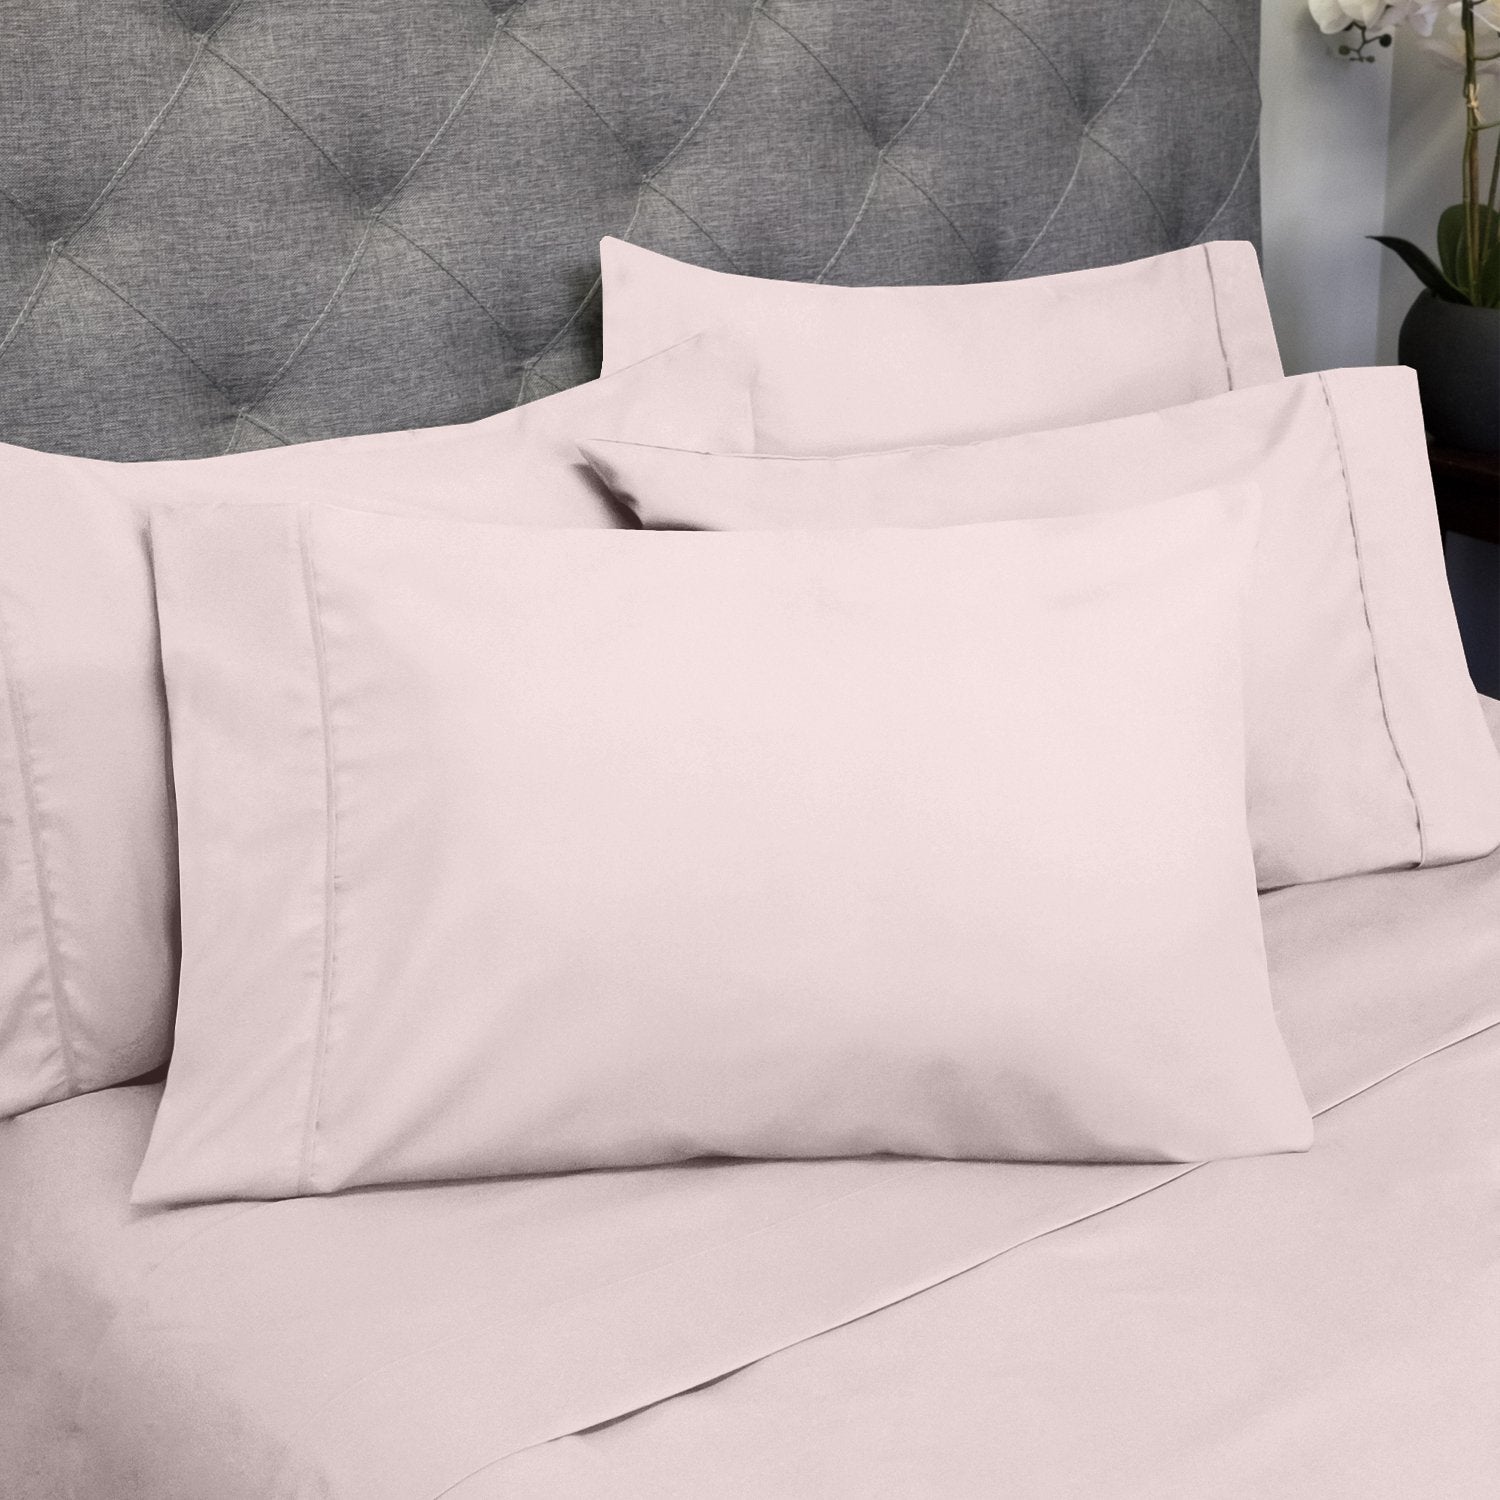 Deluxe 6-Piece Bed Sheet Set (Pale Pink) - Pillowcases